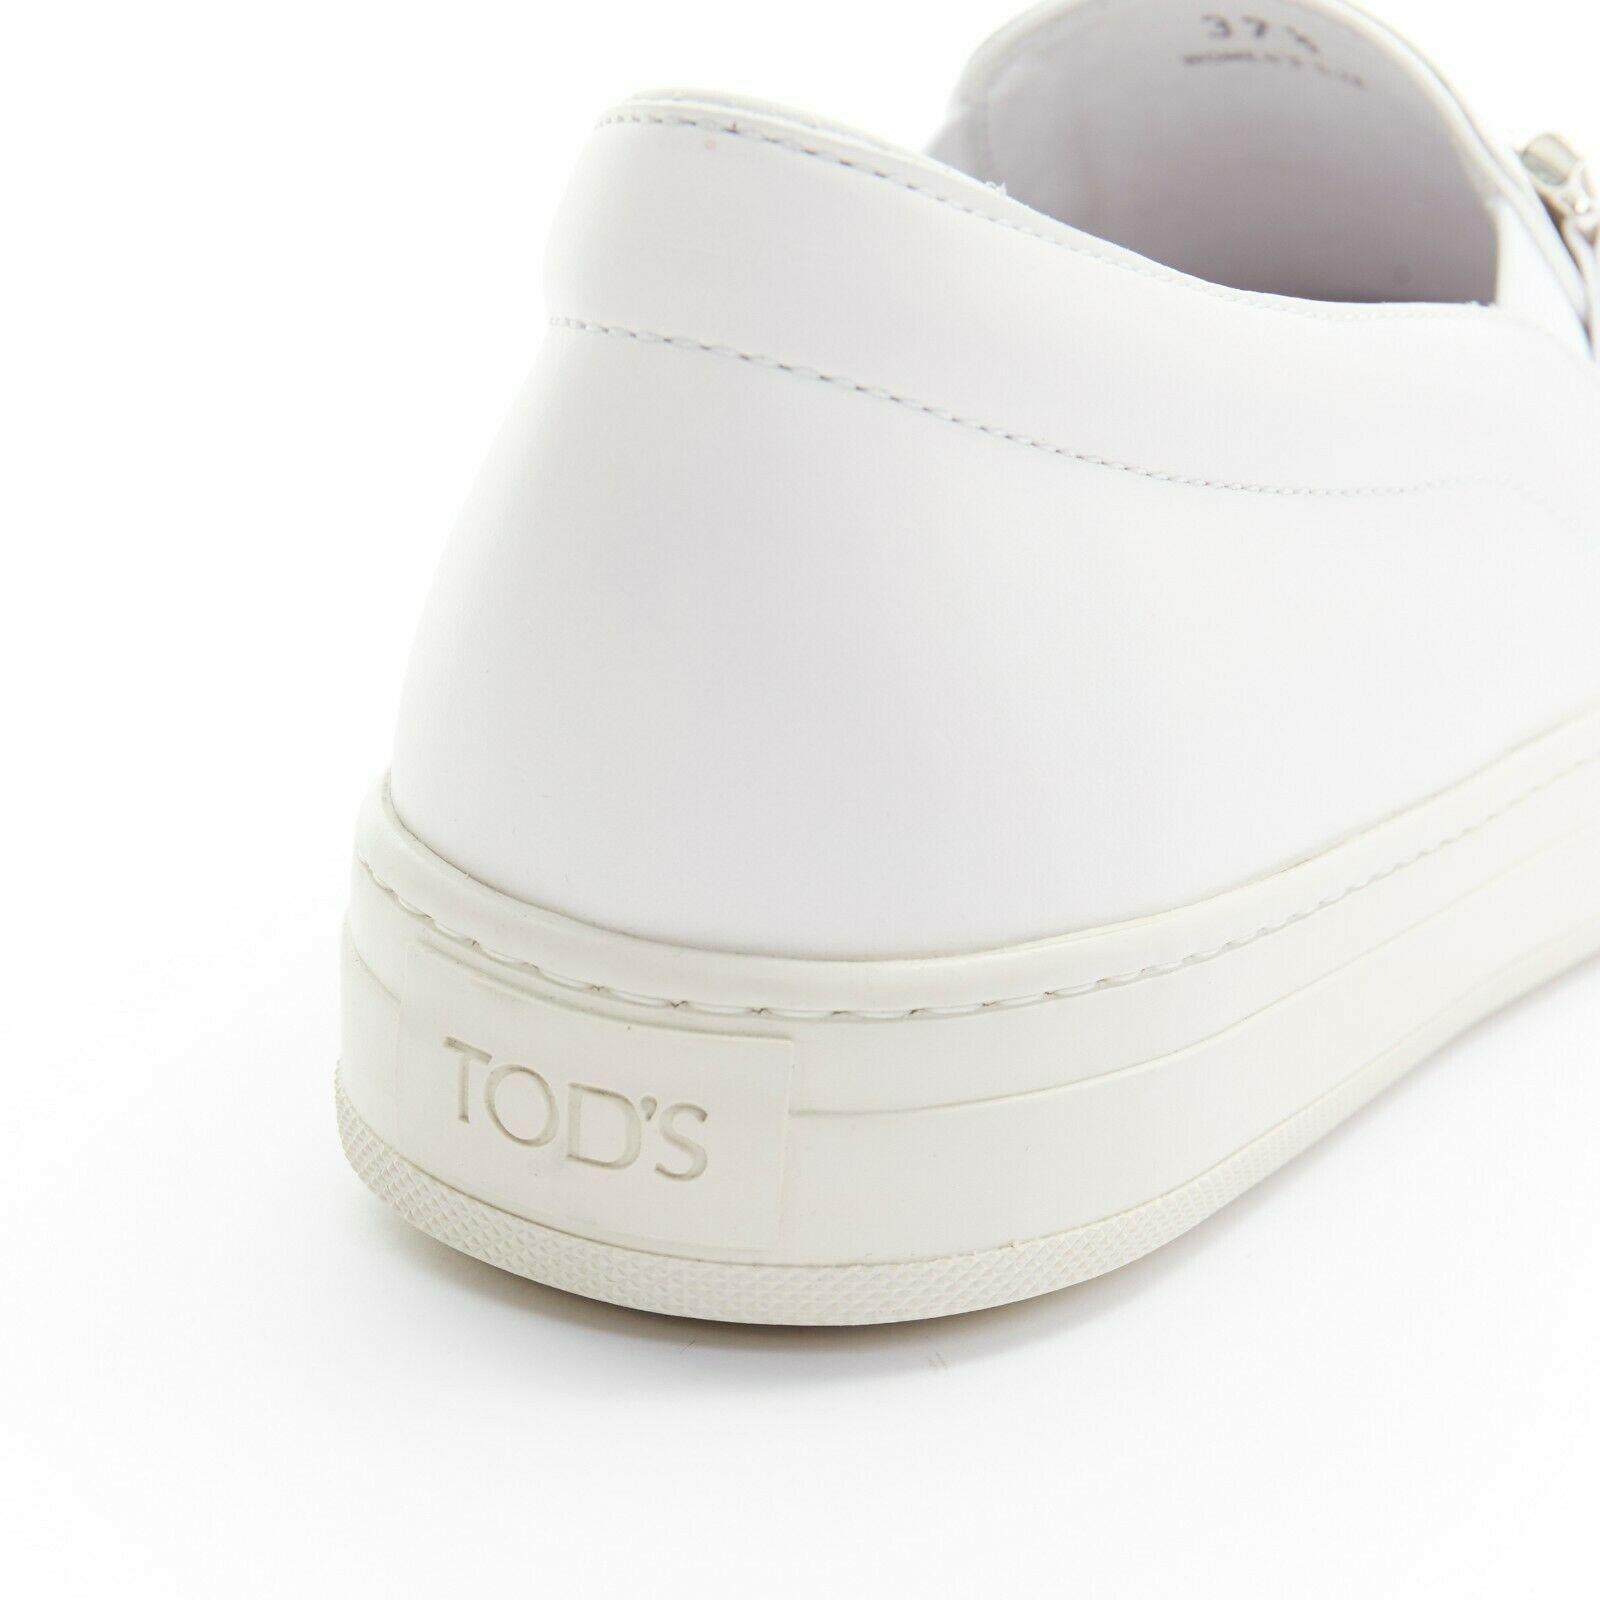 new TOD'S white leather crystal paved buckle round toe sneaker skate shoe EU37.5 3